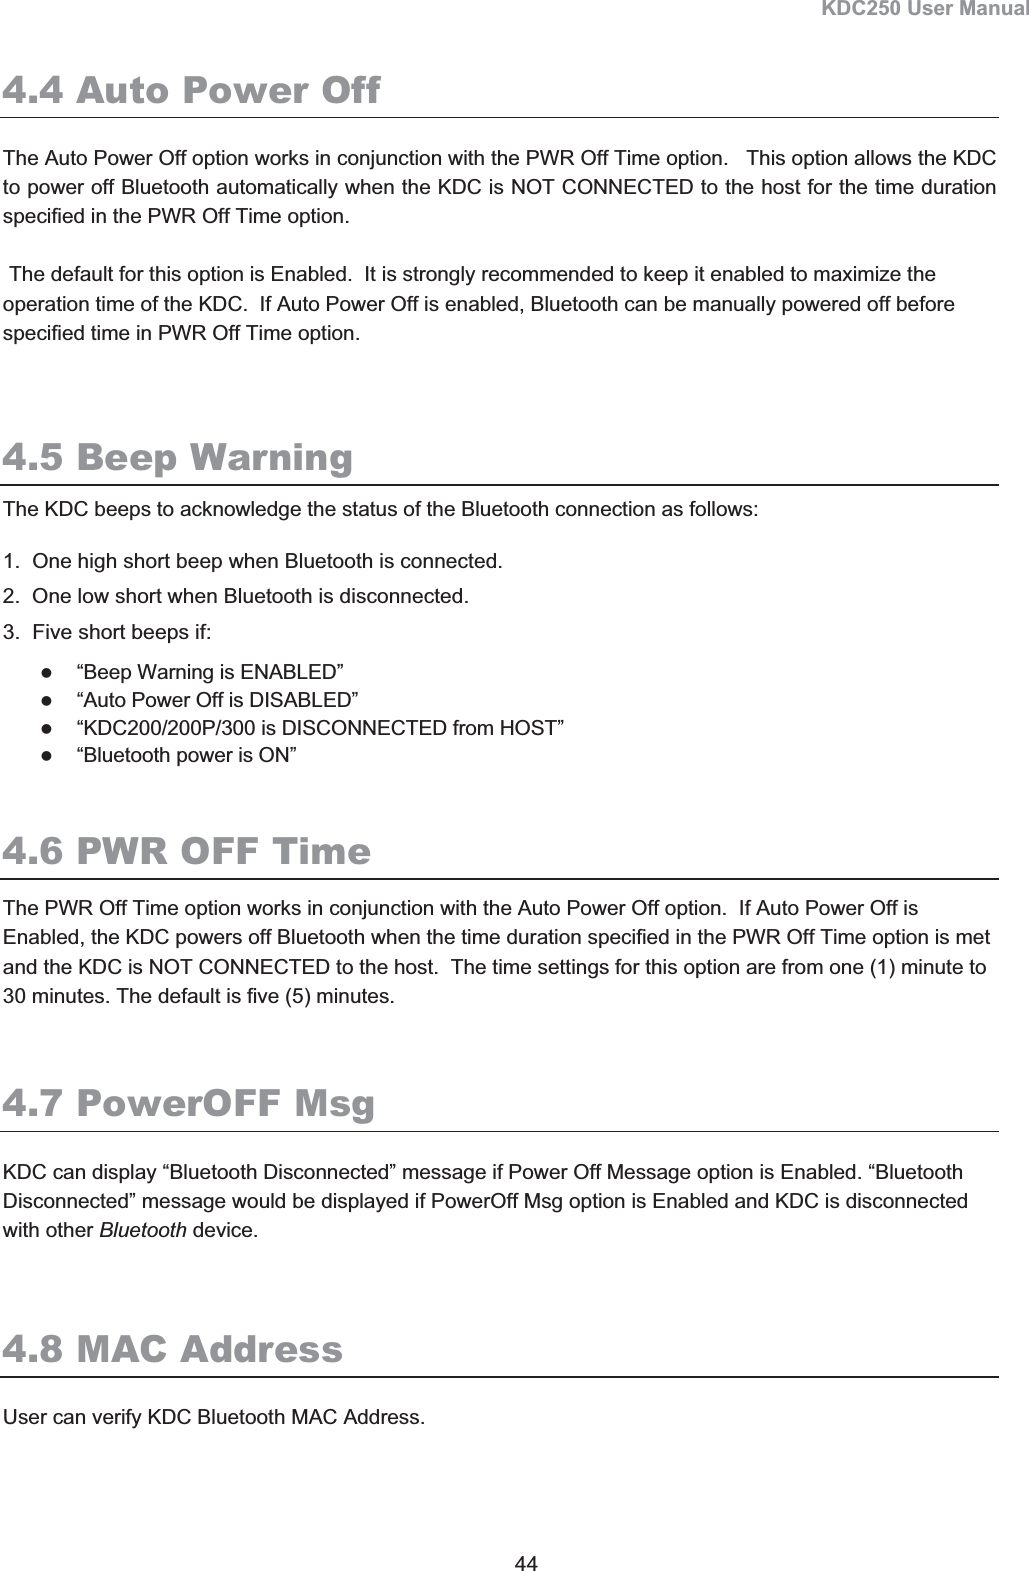 KDC250 User Manual 44 4.4 Auto Power OffThe Auto Power Off option works in conjunction with the PWR Off Time option.   This option allows the KDC to power off Bluetooth automatically when the KDC is NOT CONNECTED to the host for the time duration specified in the PWR Off Time option.  The default for this option is Enabled.  It is strongly recommended to keep it enabled to maximize the operation time of the KDC.  If Auto Power Off is enabled, Bluetooth can be manually powered off before specified time in PWR Off Time option.  4.5 Beep WarningThe KDC beeps to acknowledge the status of the Bluetooth connection as follows:  1.  One high short beep when Bluetooth is connected. 2.  One low short when Bluetooth is disconnected.  3.  Five short beeps if:  z“Beep Warning is ENABLED” z“Auto Power Off is DISABLED” z“KDC200/200P/300 is DISCONNECTED from HOST” z“Bluetooth power is ON” 4.6 PWR OFF TimeThe PWR Off Time option works in conjunction with the Auto Power Off option.  If Auto Power Off is Enabled, the KDC powers off Bluetooth when the time duration specified in the PWR Off Time option is met and the KDC is NOT CONNECTED to the host.  The time settings for this option are from one (1) minute to 30 minutes. The default is five (5) minutes.  4.7 PowerOFF Msg KDC can display “Bluetooth Disconnected” message if Power Off Message option is Enabled. “Bluetooth Disconnected” message would be displayed if PowerOff Msg option is Enabled and KDC is disconnected with other Bluetooth device. 4.8 MAC AddressUser can verify KDC Bluetooth MAC Address. 